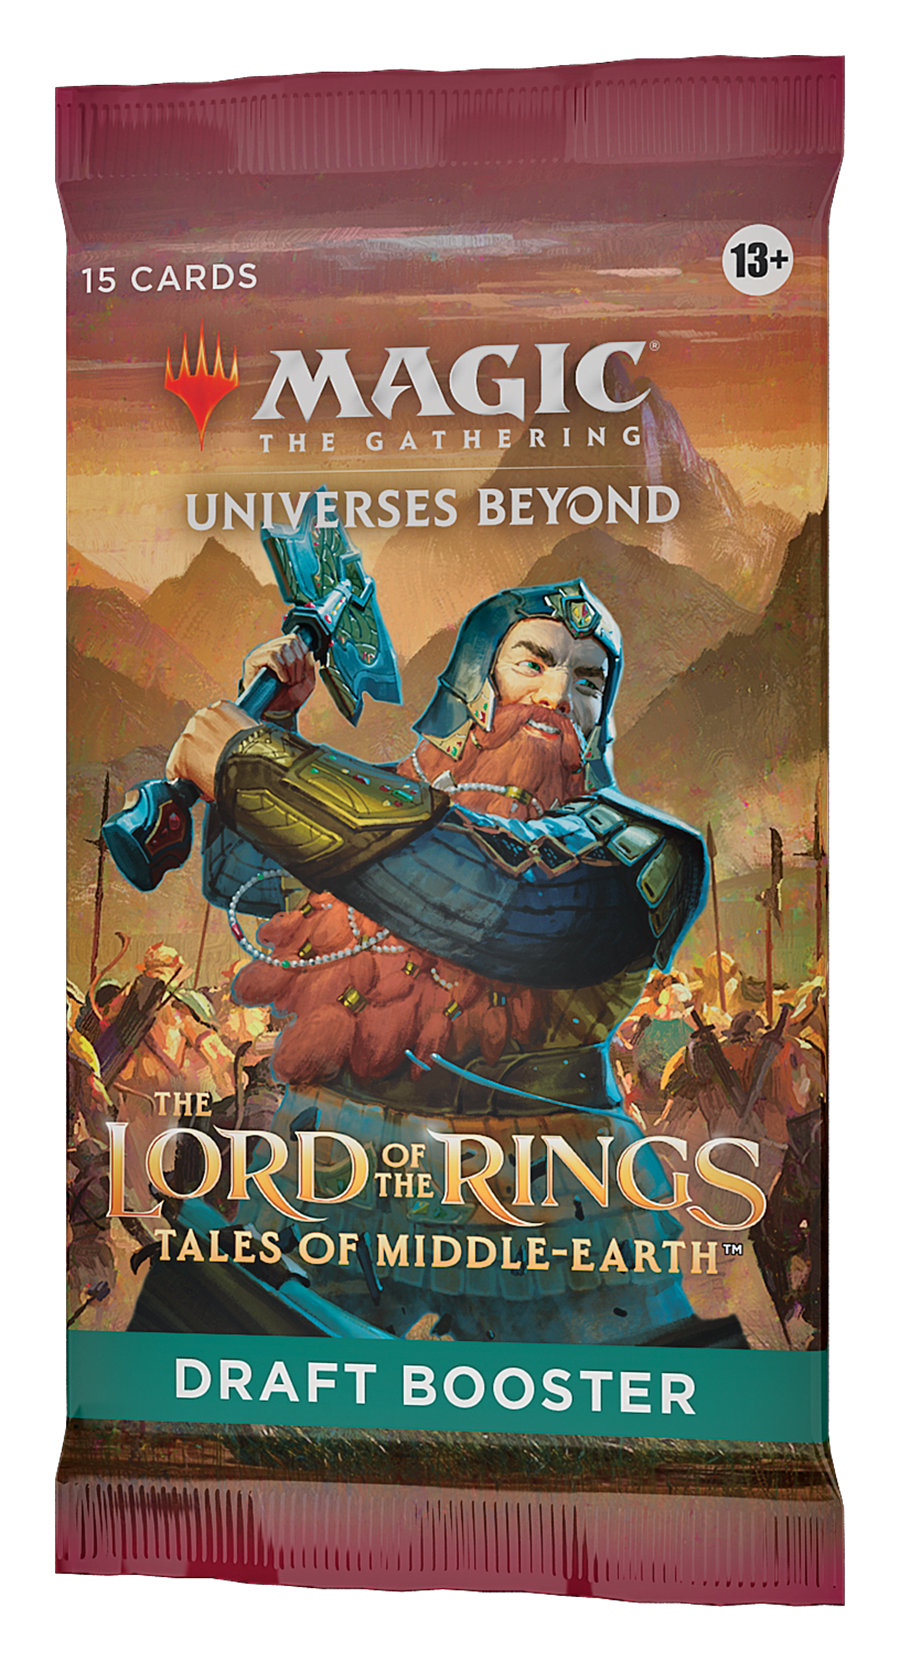 LTR - MTG - Draft Booster Pack - Universes Beyond: The Lord of the Rings: Tales of Middle-earth - Magic the Gathering